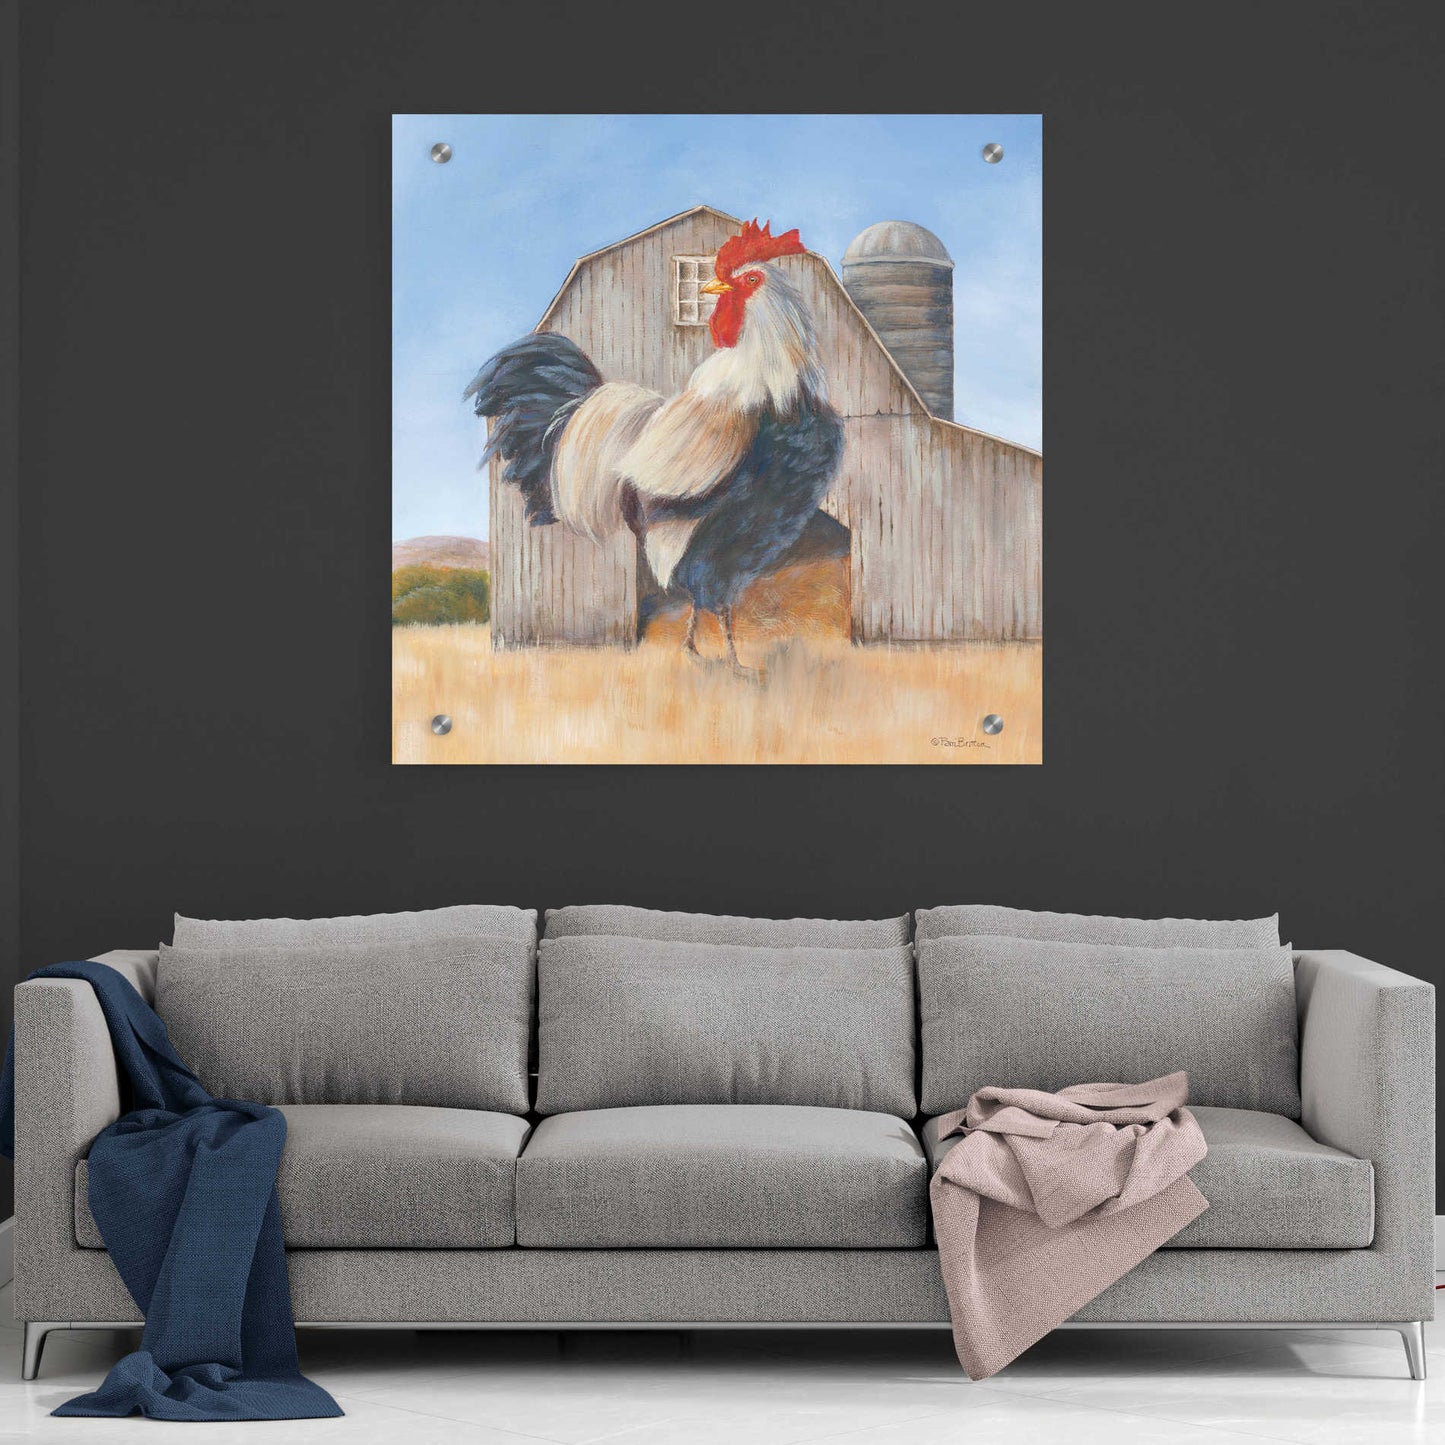 Epic Art 'Country Rooster' by Pam Britton, Acrylic Glass Wall Art,36x36